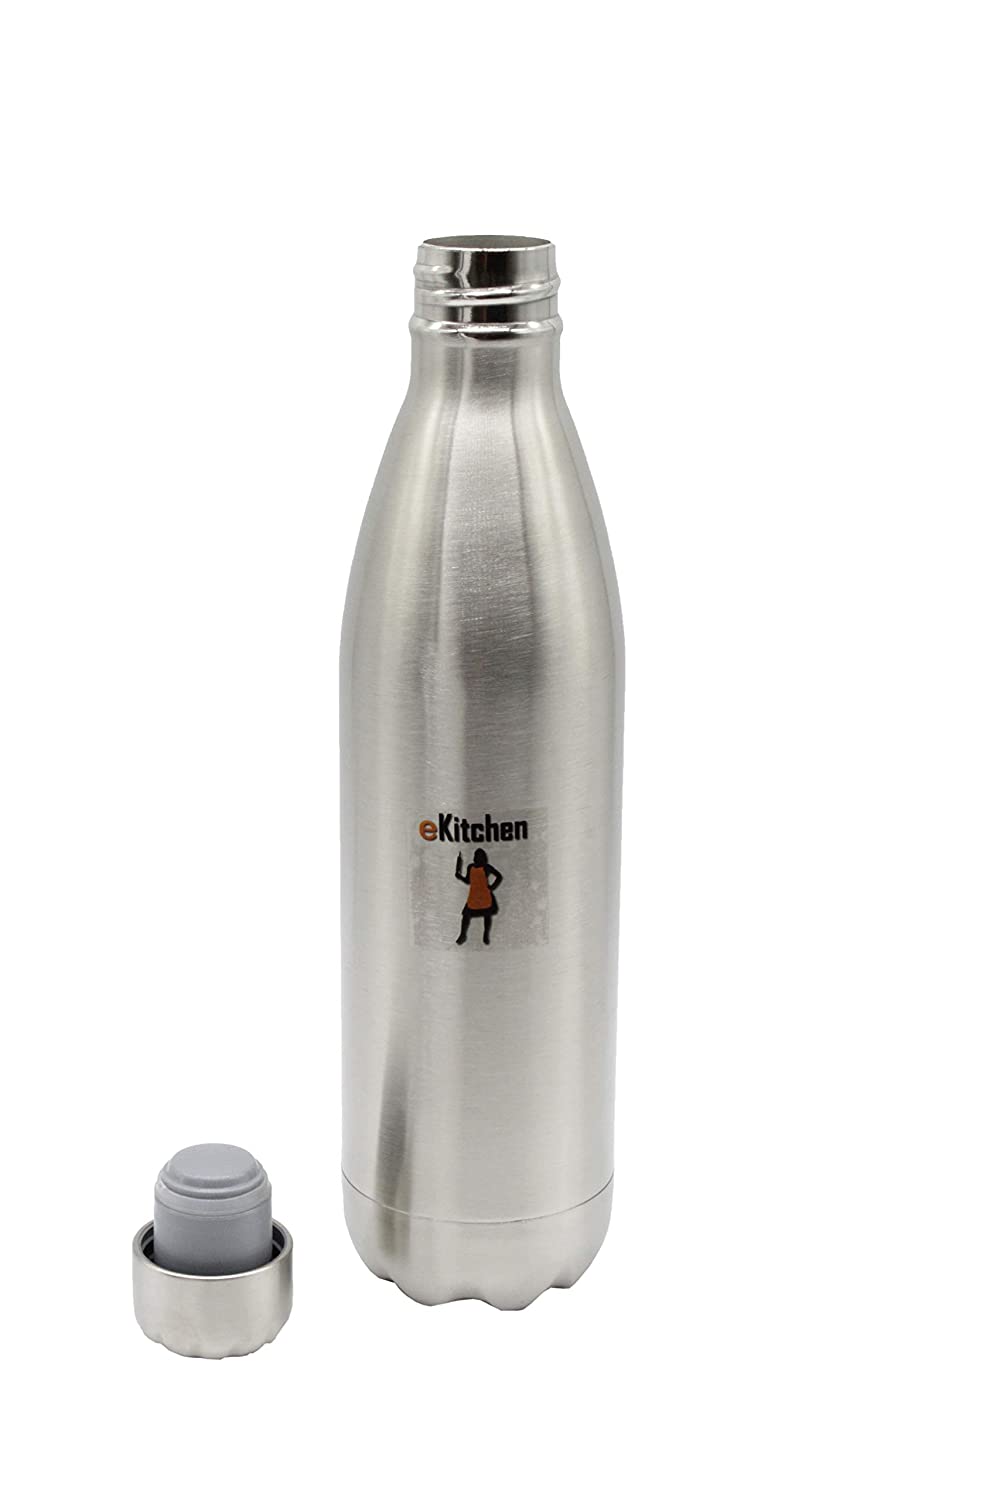 Stainless Steel 750ml Hot and Cold Water Bottle | Flask